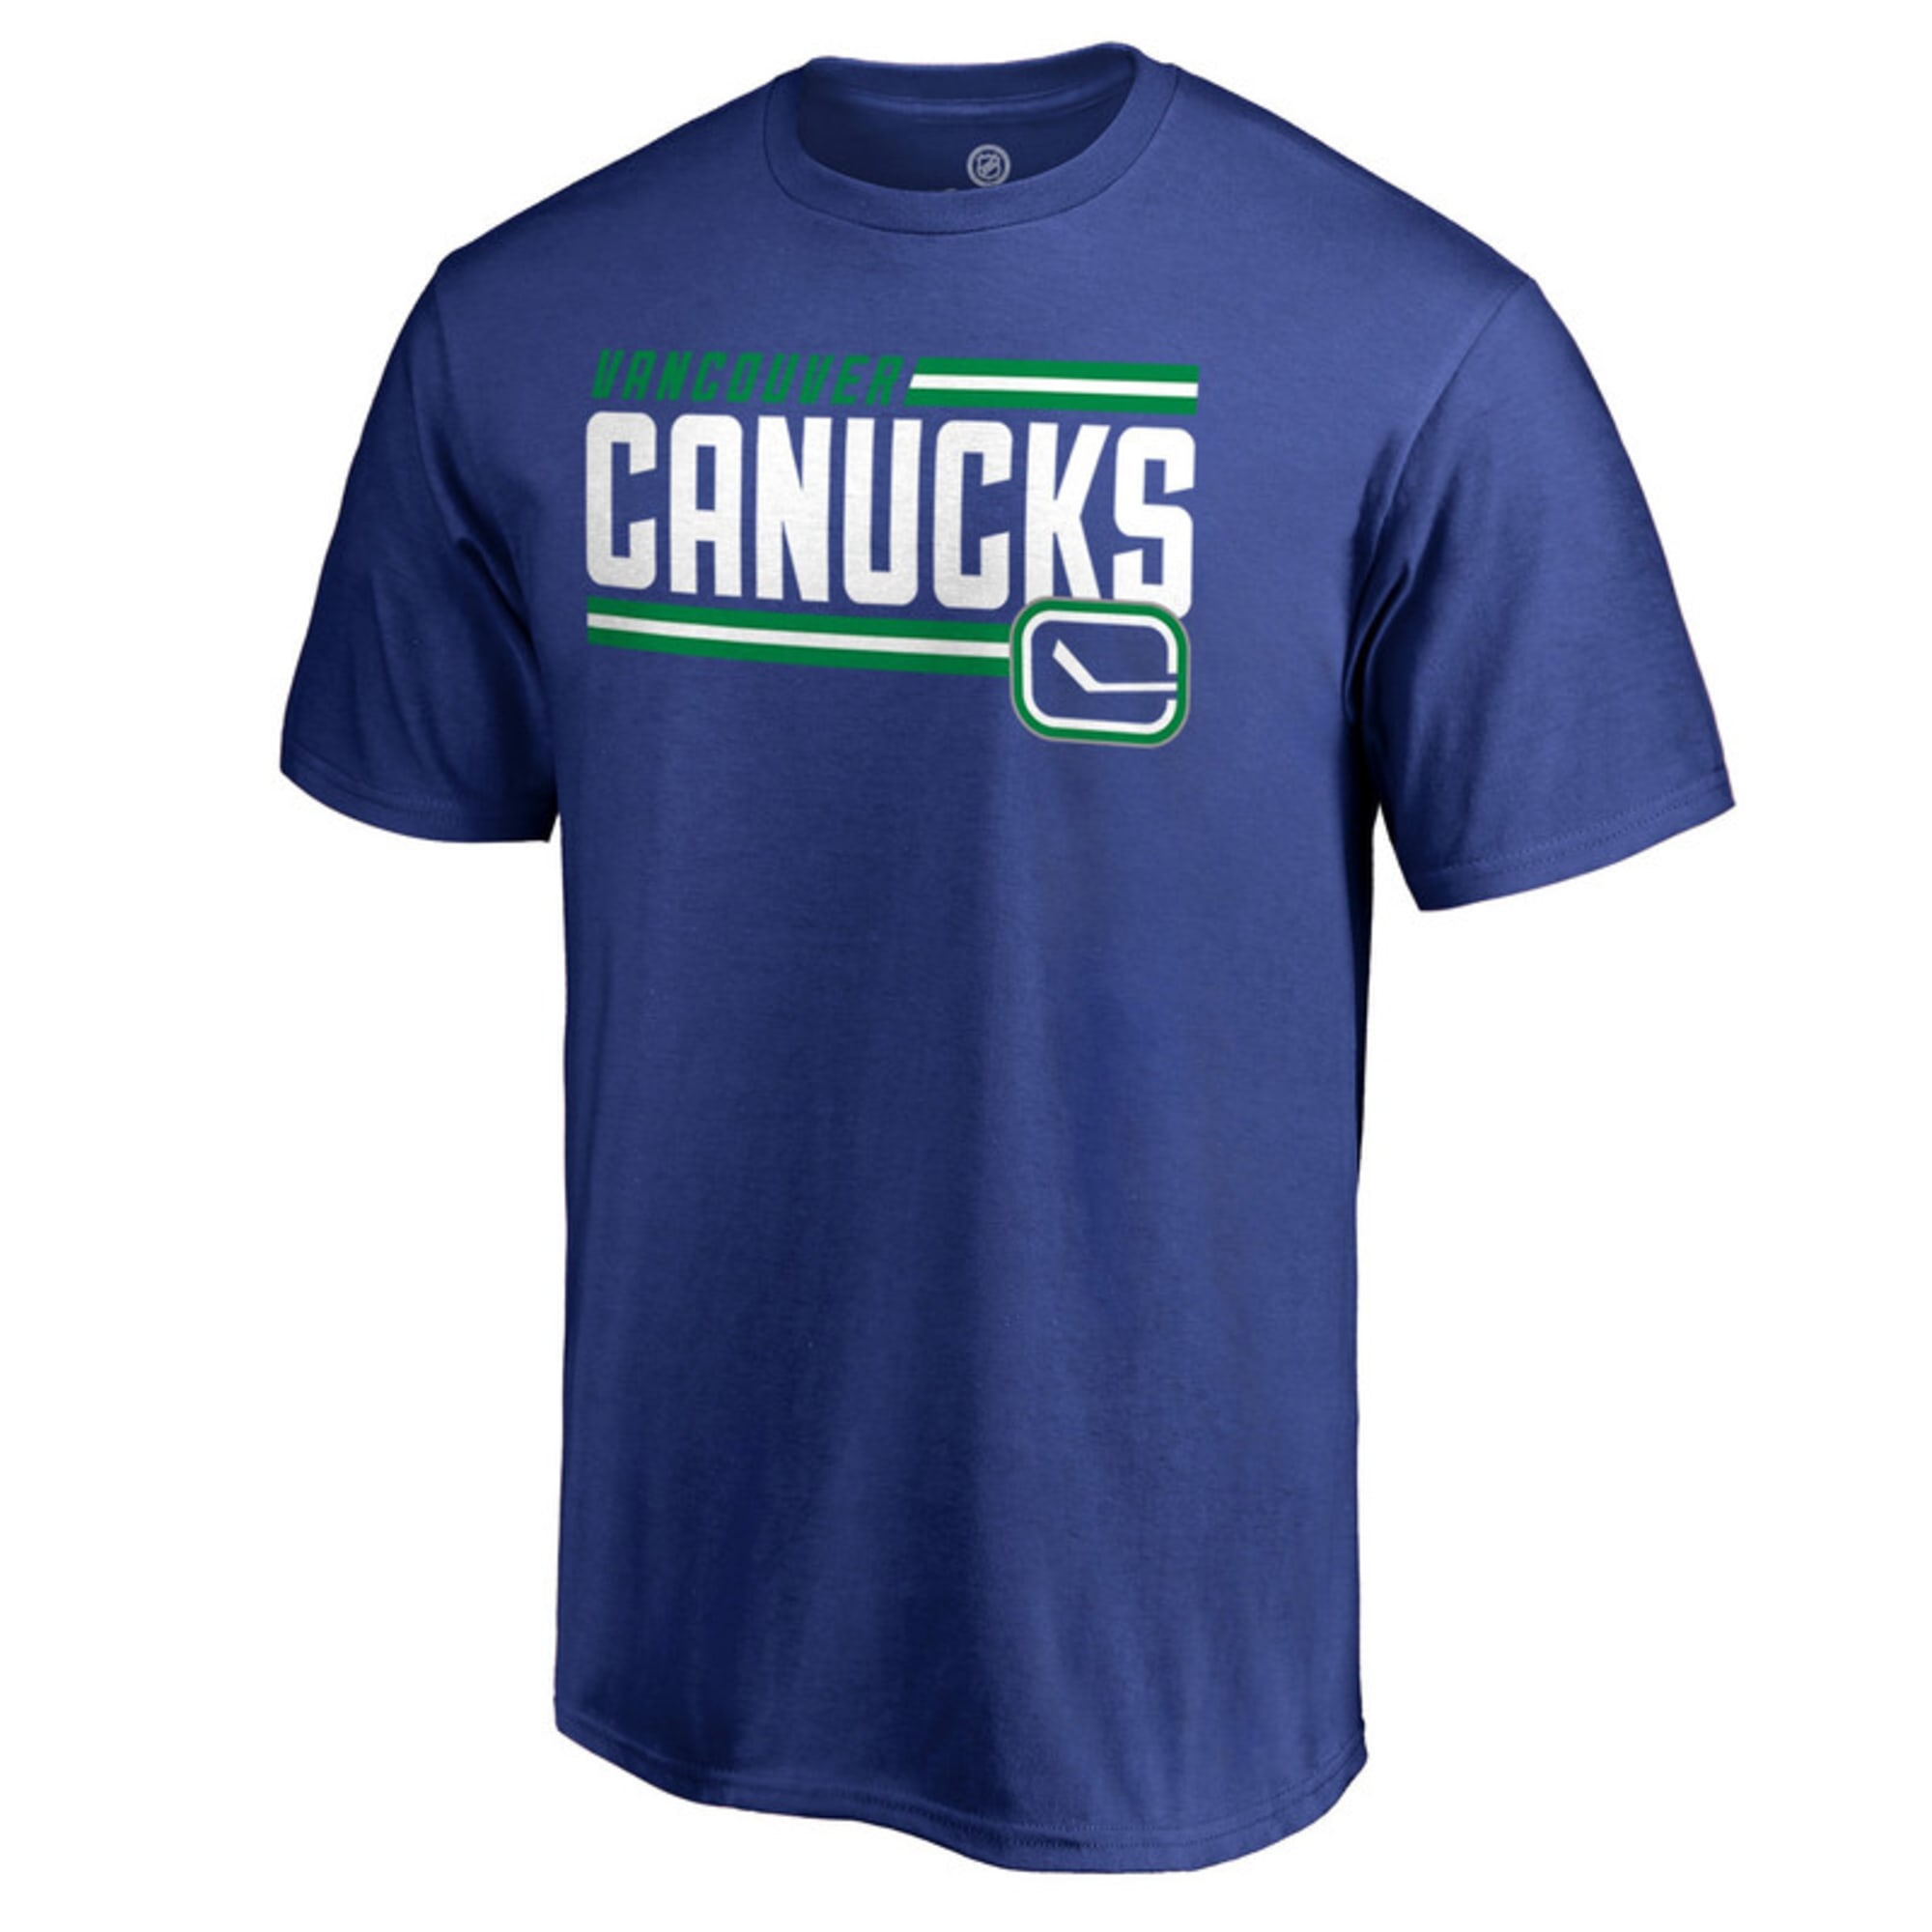 The perfect holiday gifts for the Vancouver Canucks fan